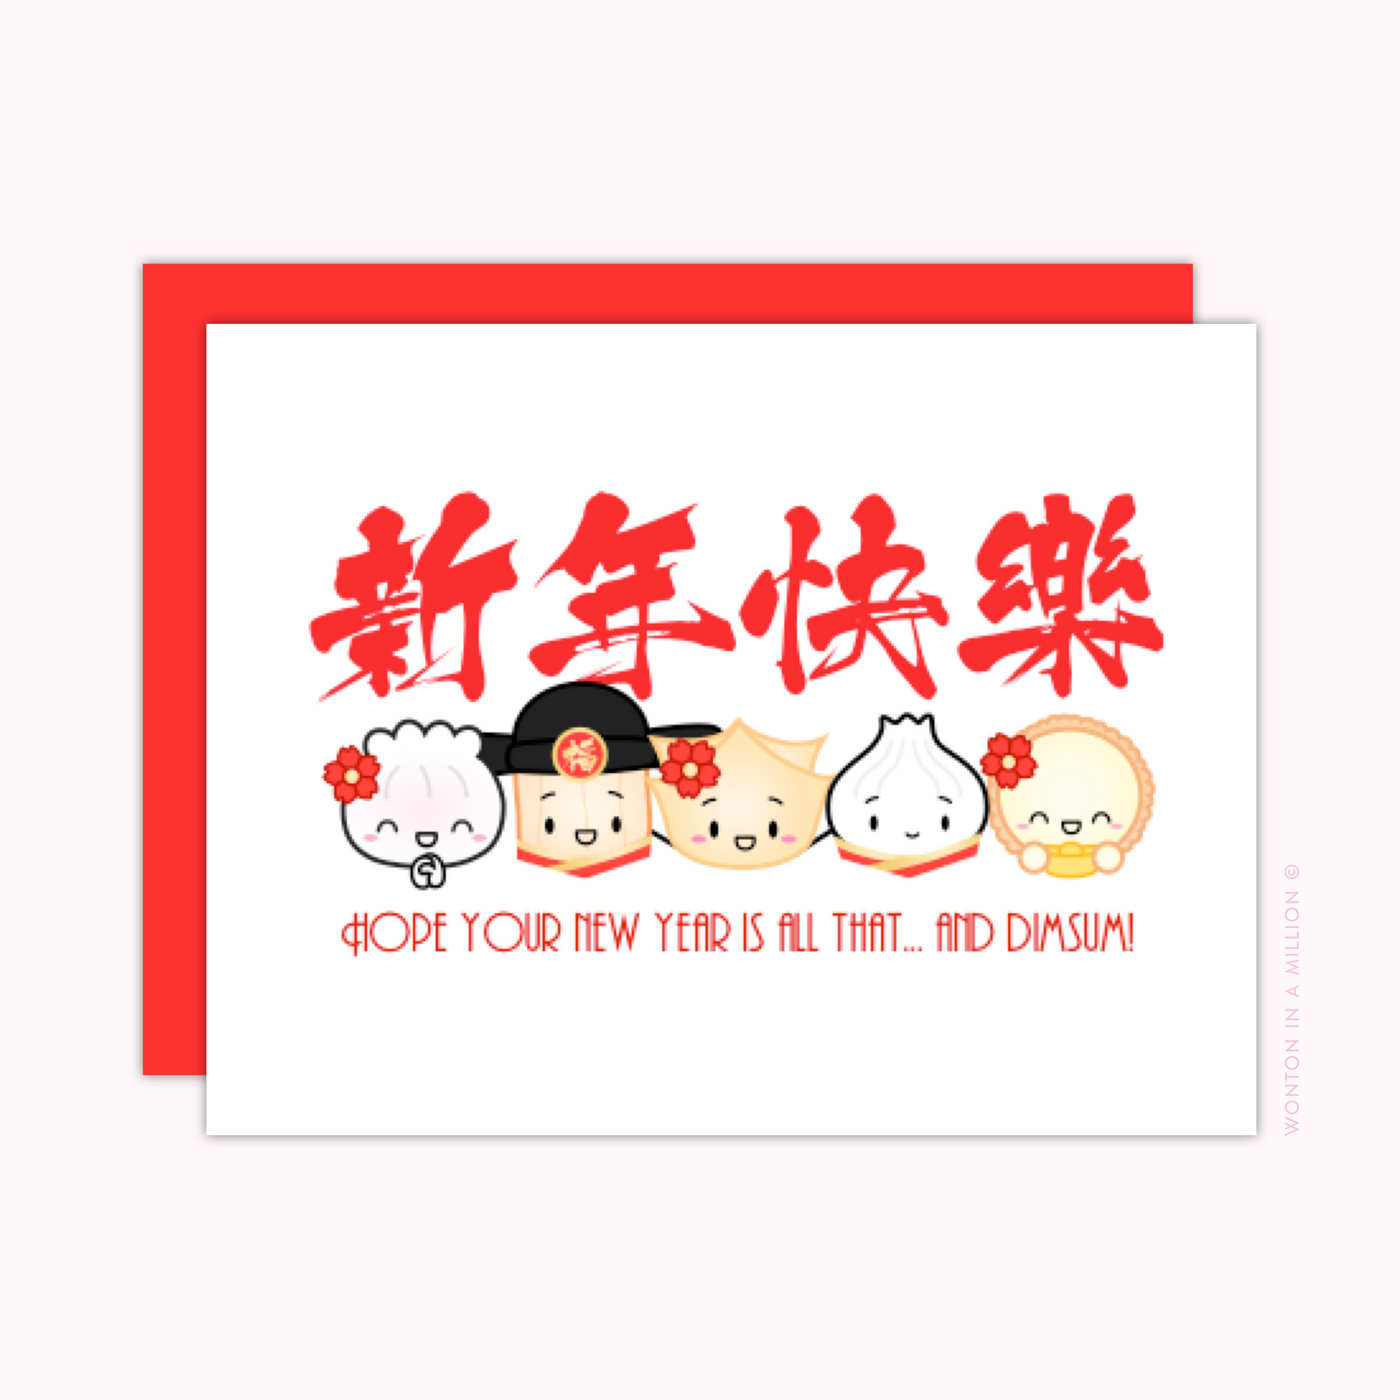 C210 | "Hope Your New Year Is All That... And Dimsum!" Chinese New Year Greeting Card (A2)